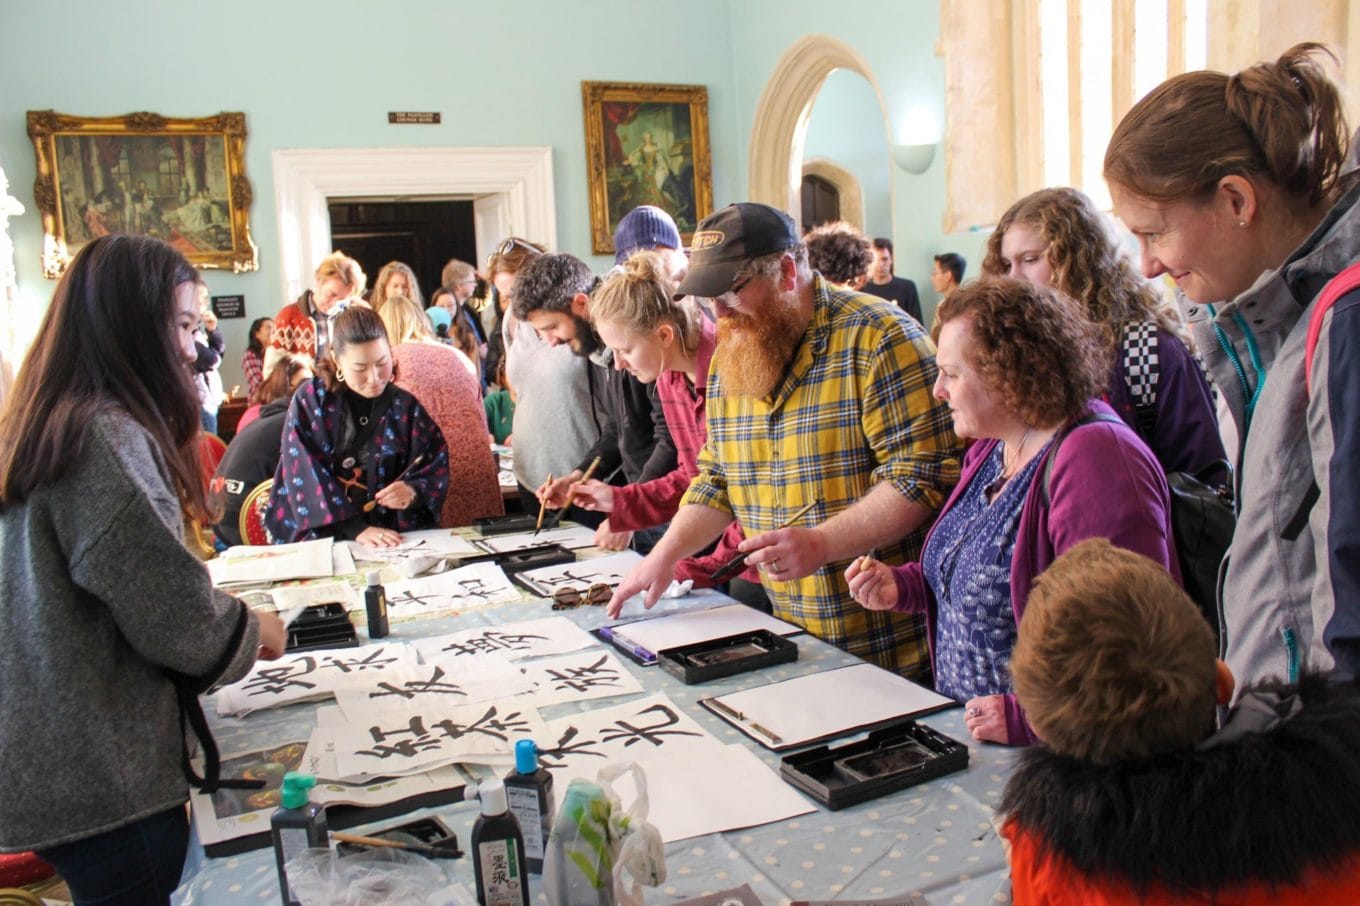 A crowd gathers around a table to practice calligraphy during the Bristol Japan Showcase